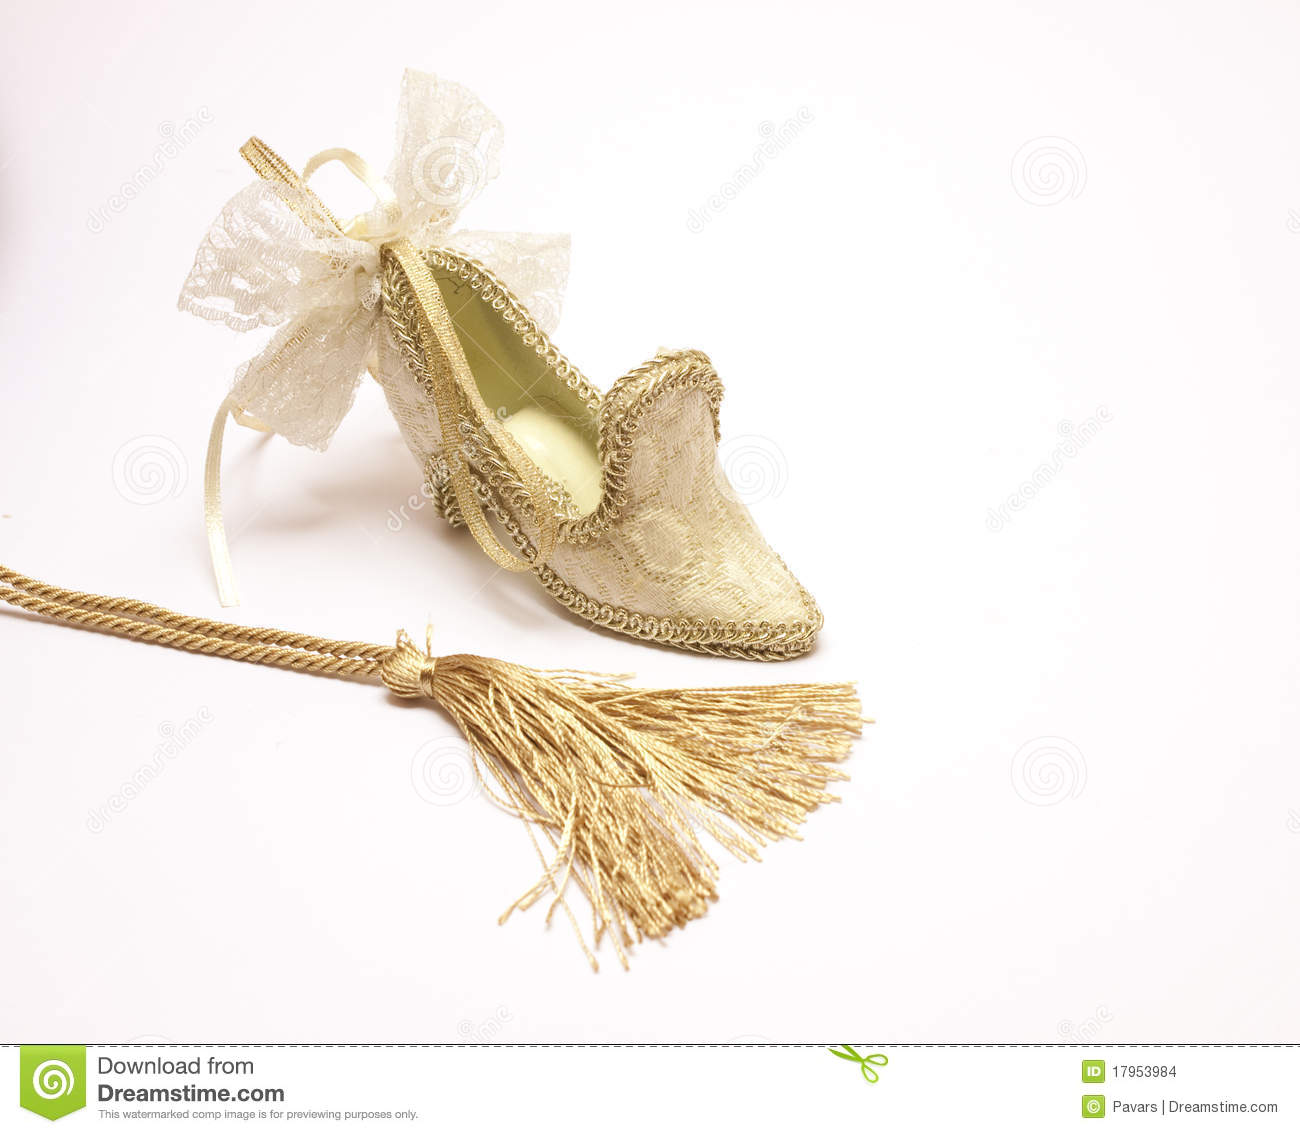 Fancy Women Shoes Over The White Background 